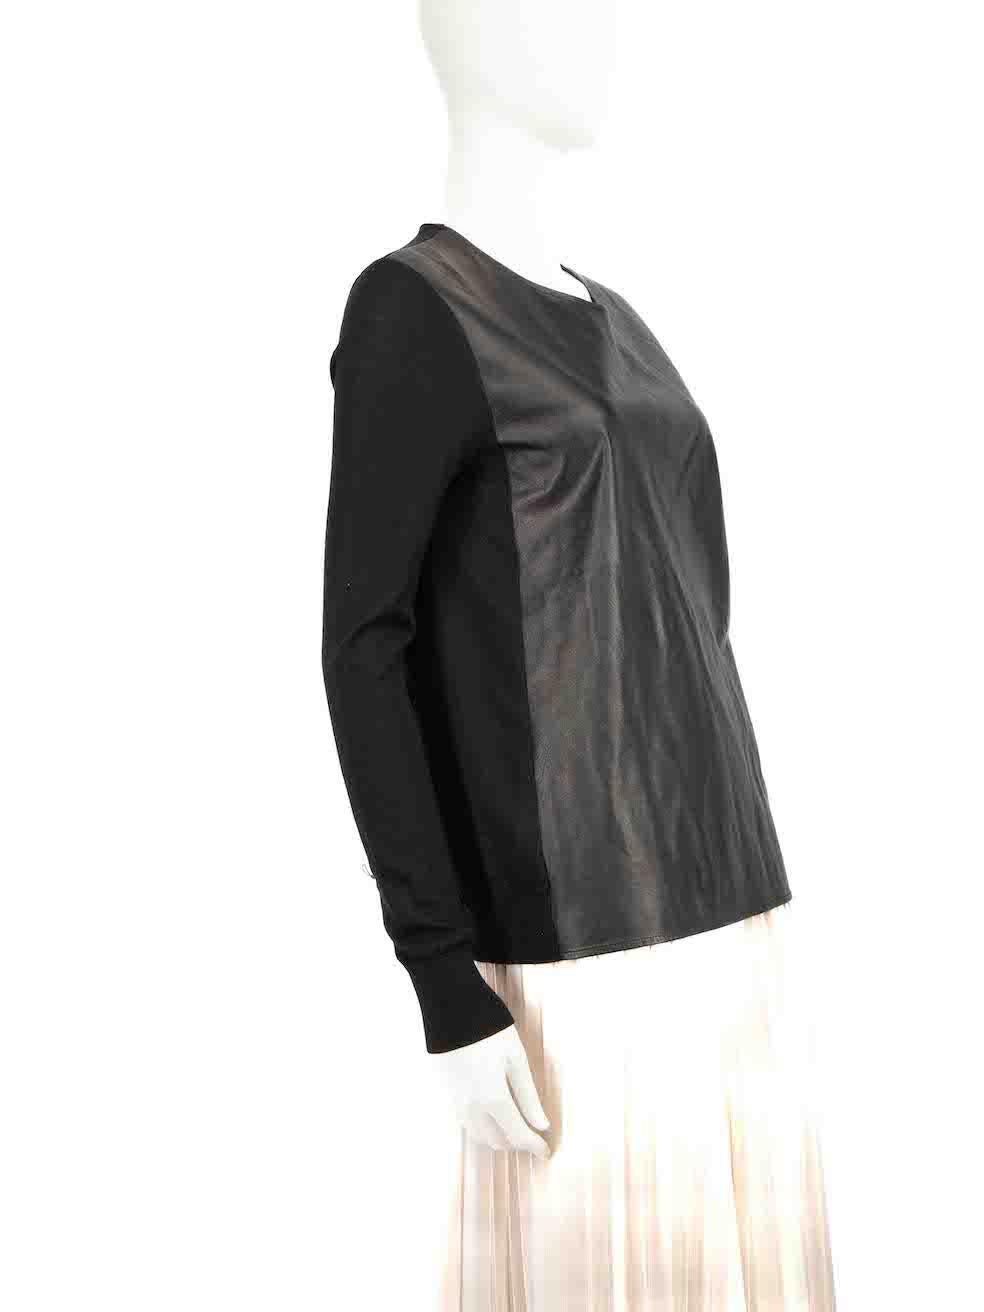 CONDITION is Very good. Minor wear to top is evident. There is a pluck to the weave on the right side sleeve near the knitted cuff on this Vince designer resale item.
 
 Details
 Black
 Wool
 Top
 Long sleeves
 Round neck
 Front leather panel
 Round